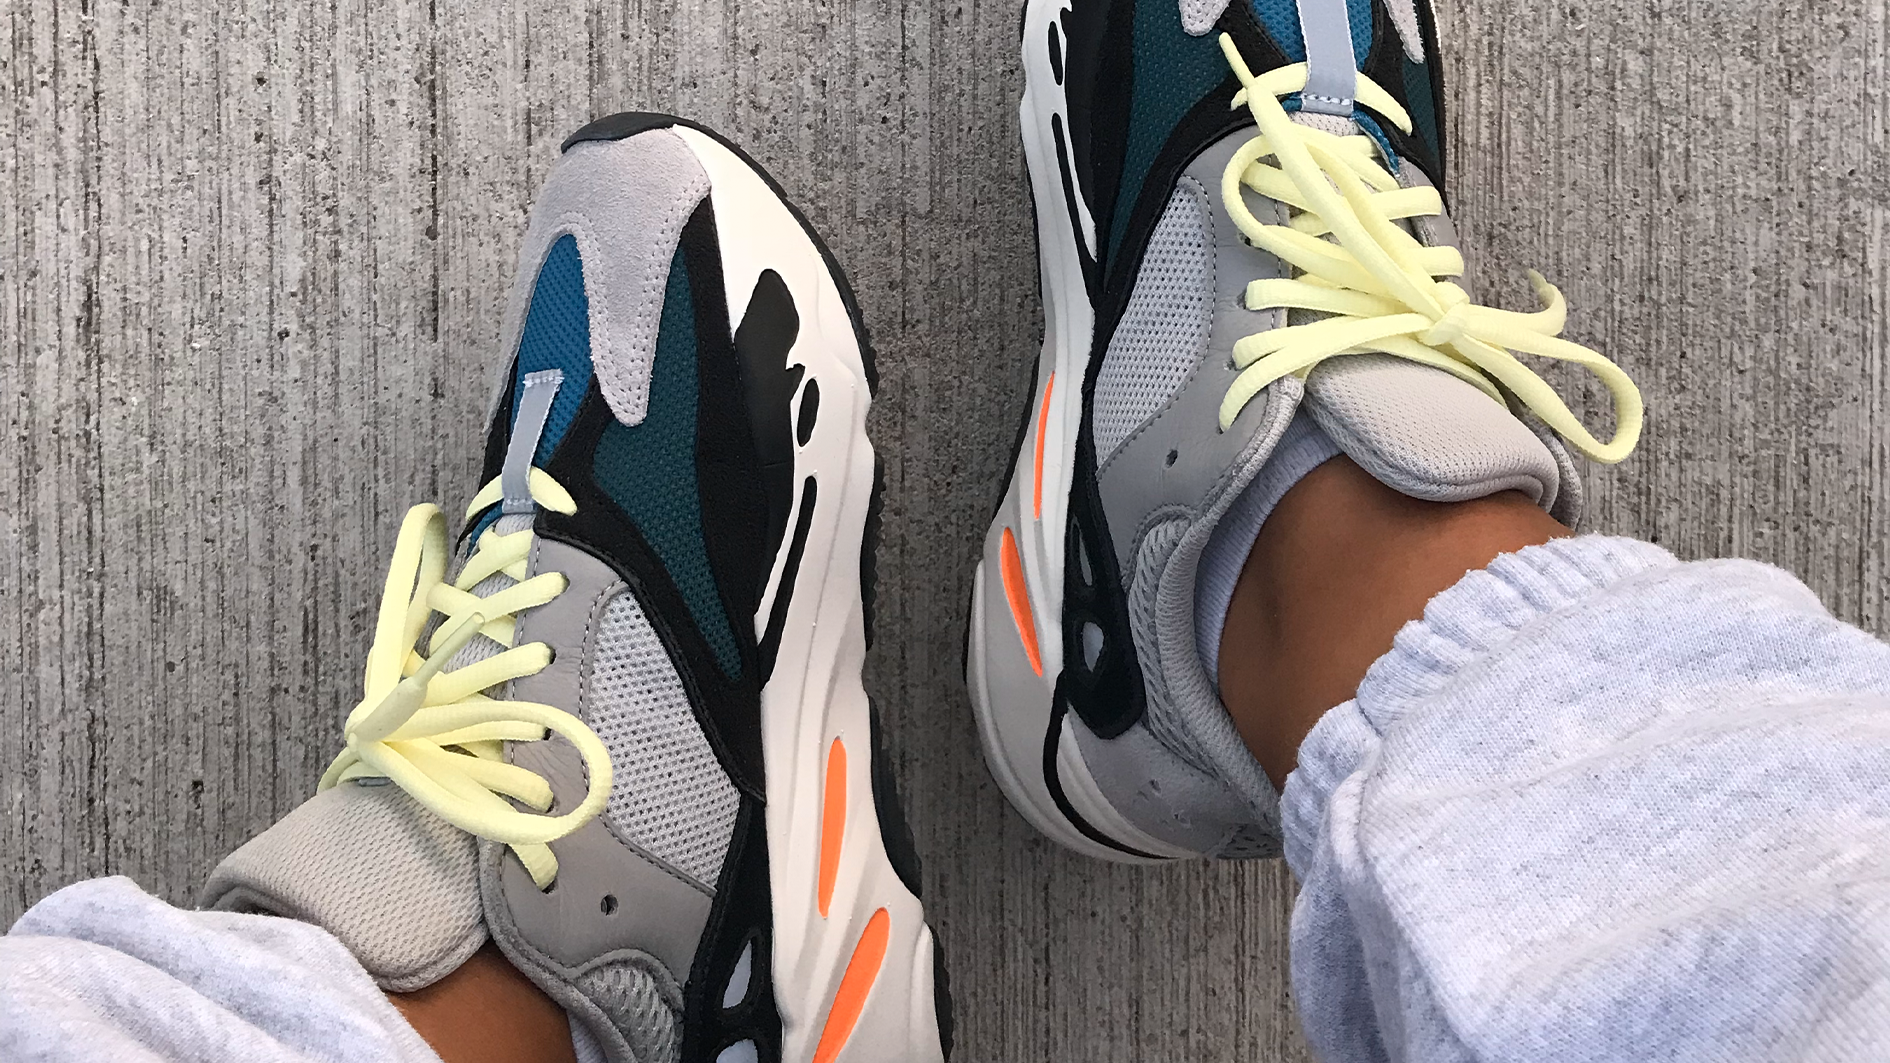 Wave Runner Sizing: How Does The Yeezy Wave Runner Fit? | The Sole